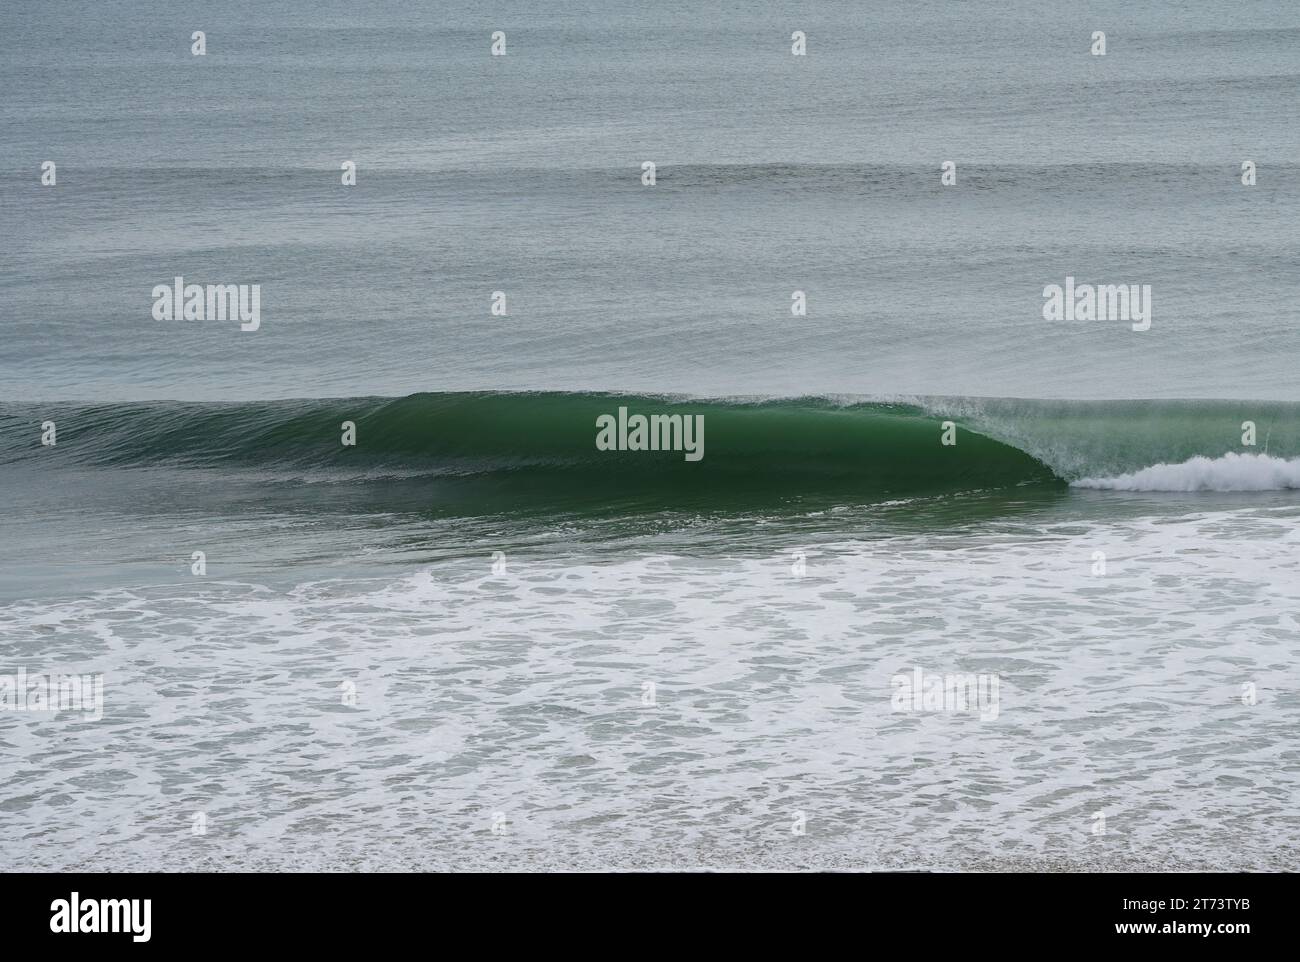 Green wave curling on a smooth silver ocean with oncoming wave sets emerging. This shot is taken at the Outer Banks NC, pre-hurricane conditions. Stock Photo